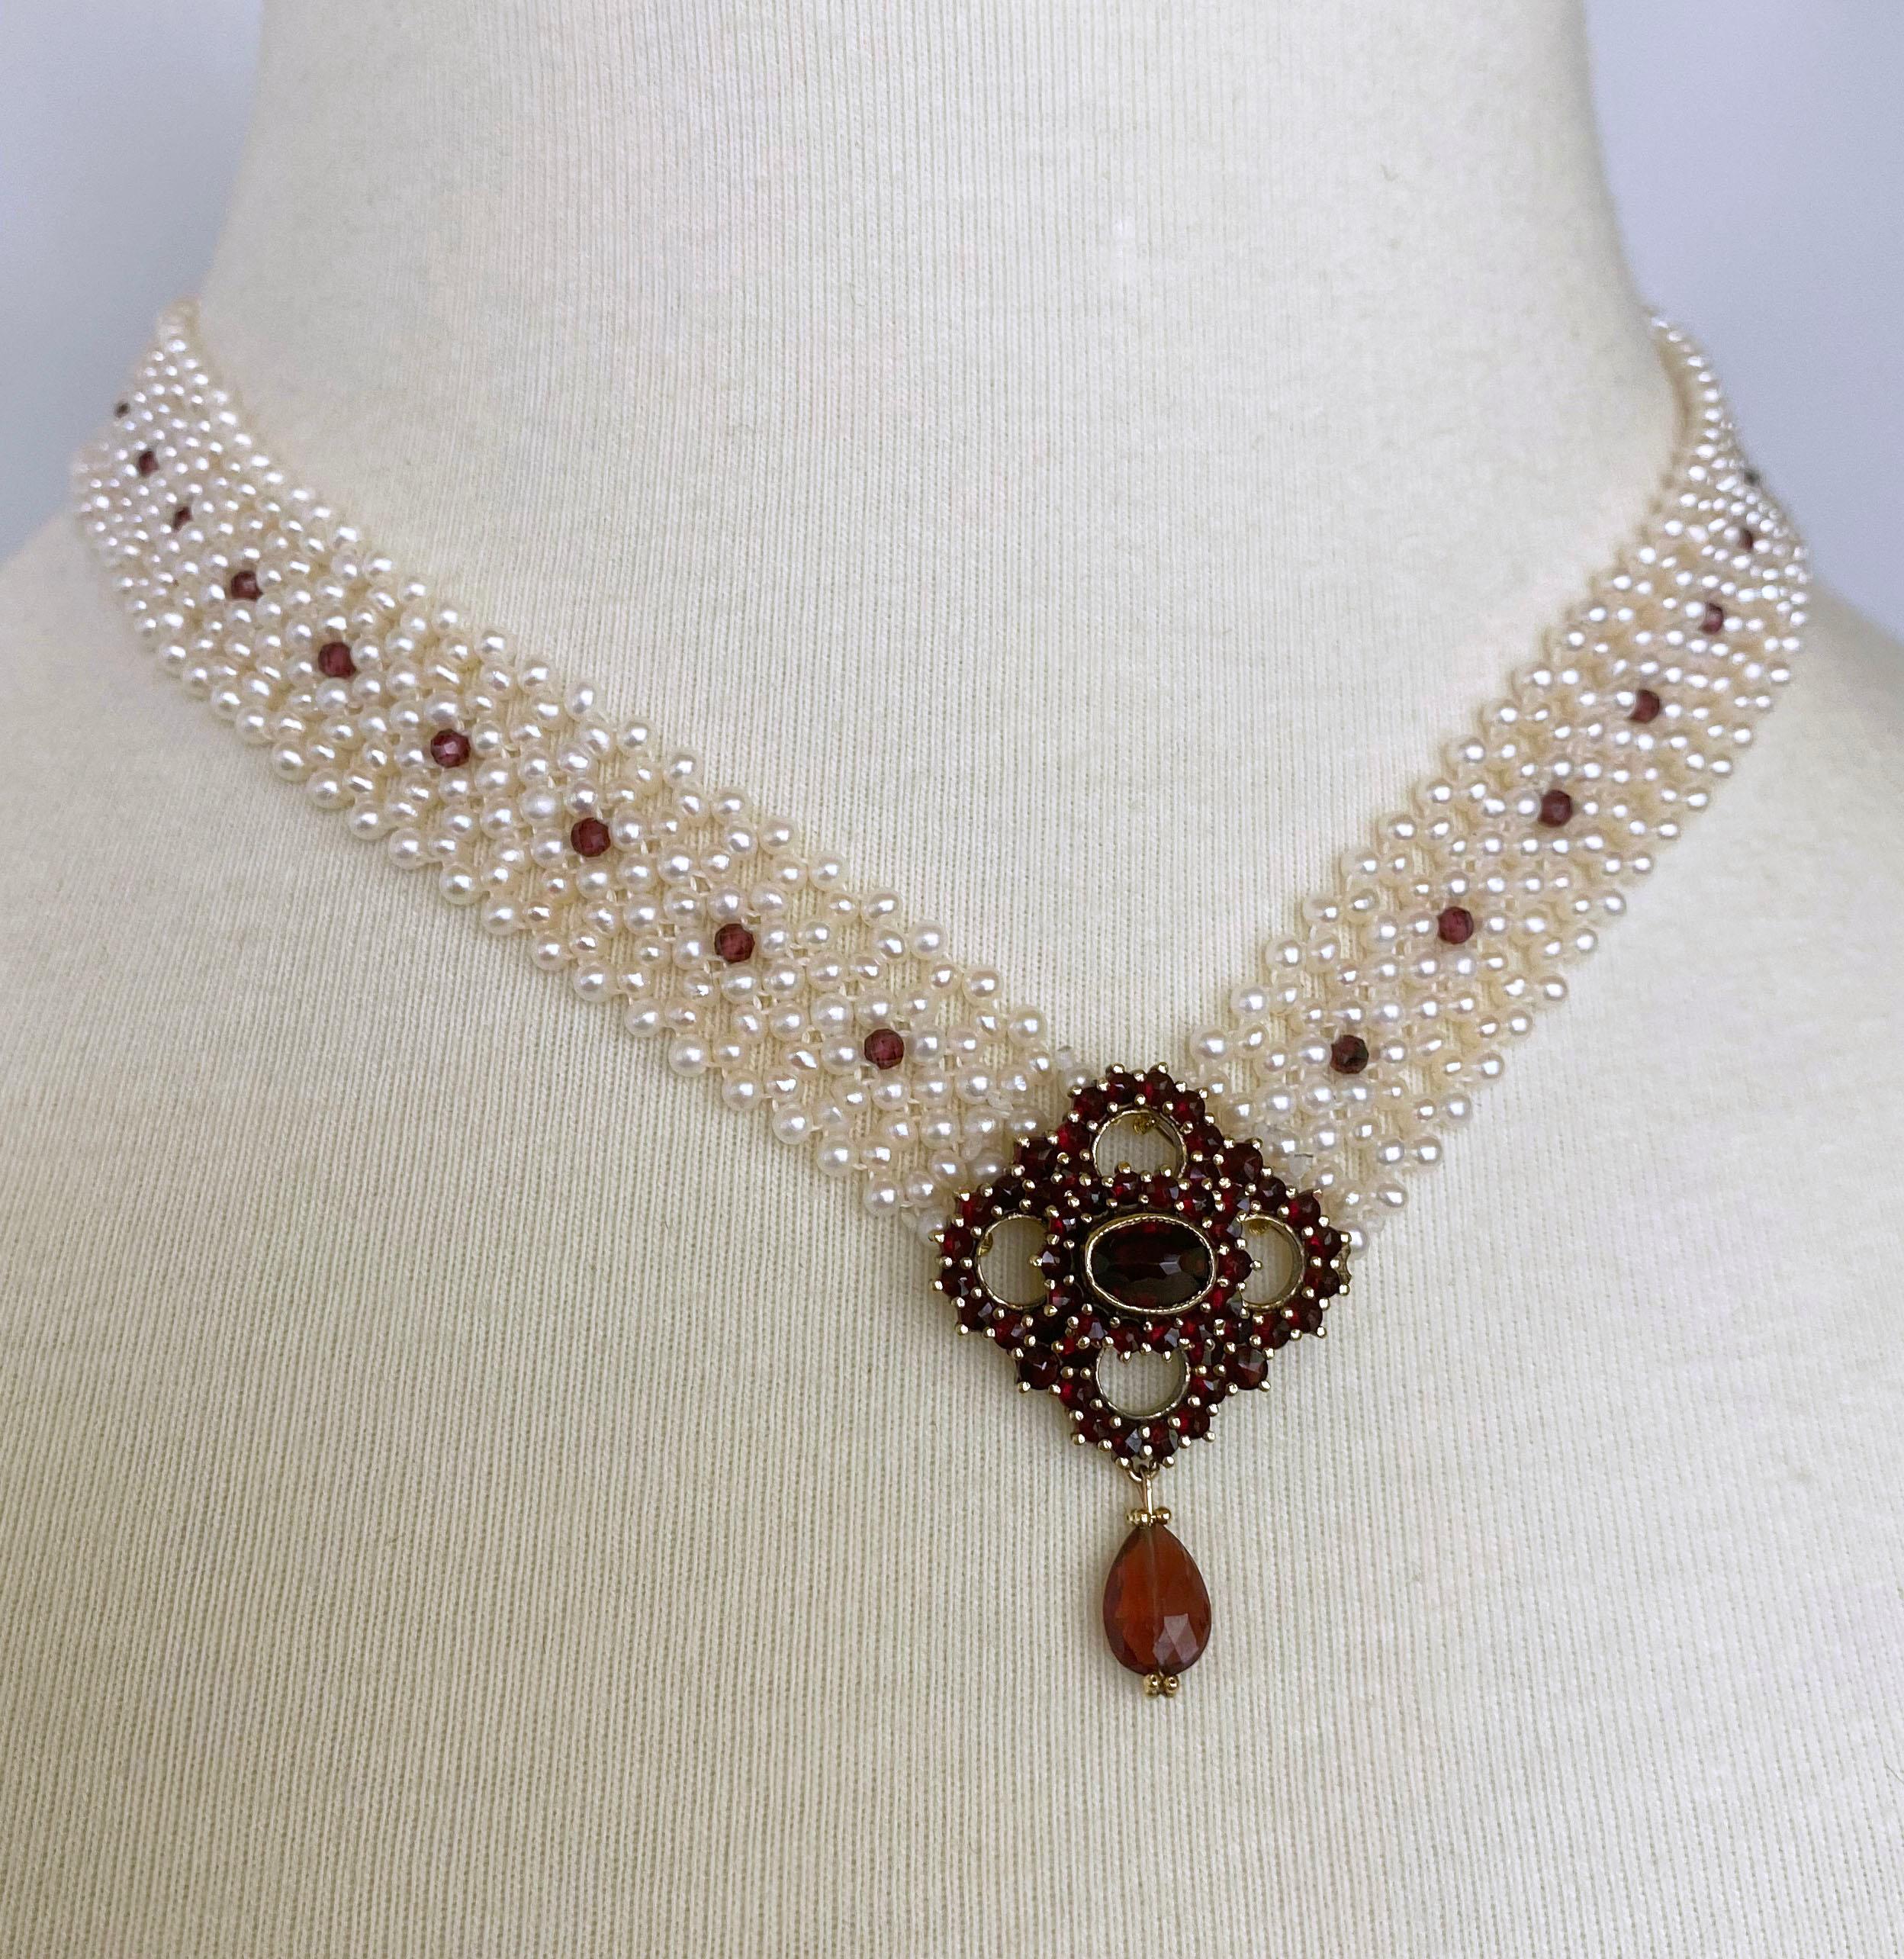 Marina J. All Pearl Woven Necklace with Vintage Garnet Centerpiece For Sale 2